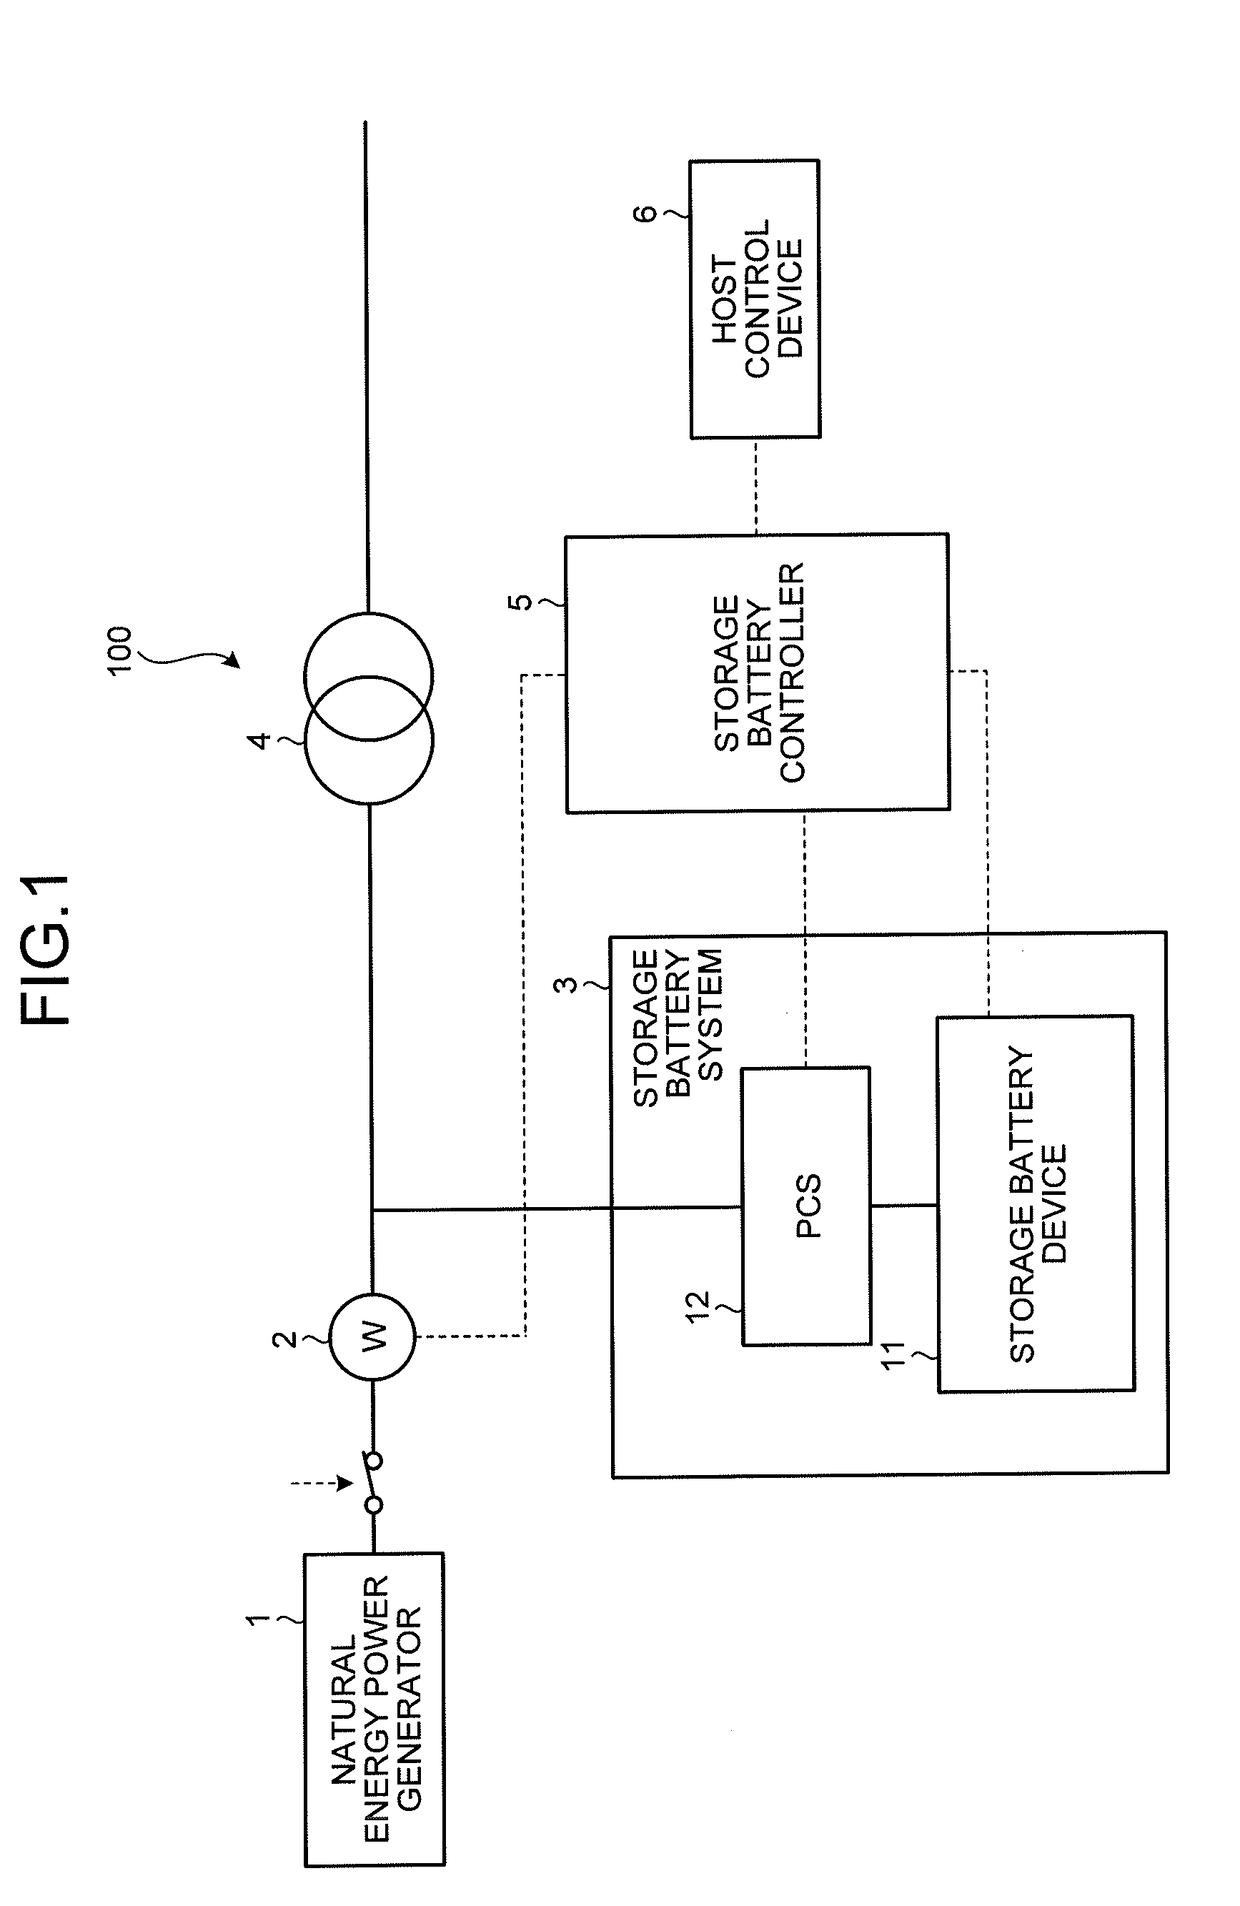 Storage battery device, storage battery system, method and computer program product